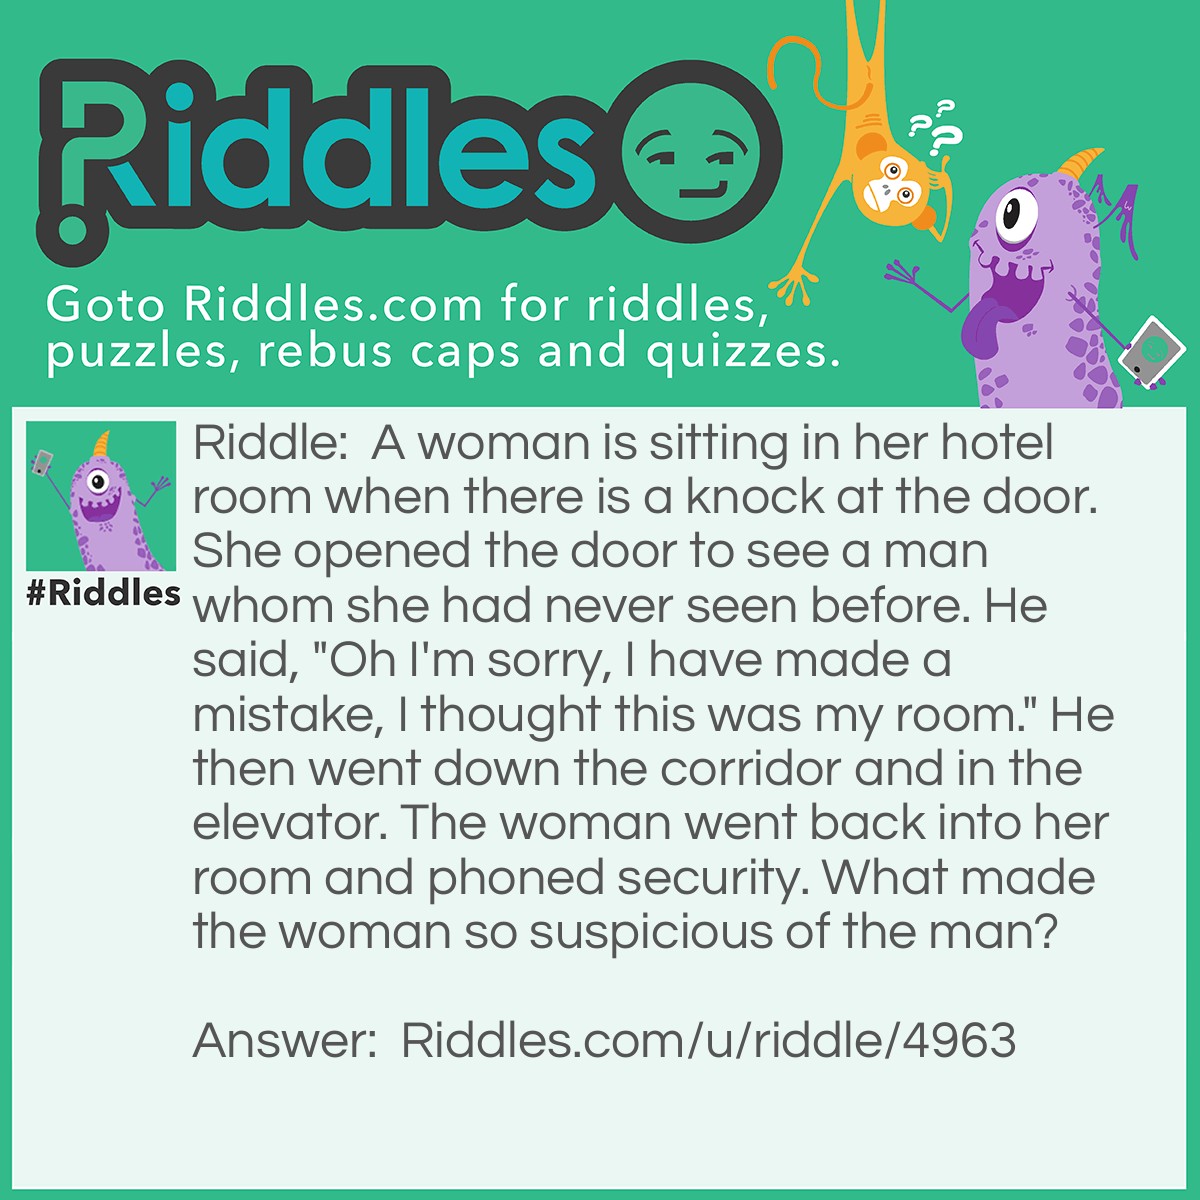 Riddle: A woman is sitting in her hotel room when there is a knock at the door. She opened the door to see a man whom she had never seen before. He said, "Oh I'm sorry, I have made a mistake, I thought this was my room." He then went down the corridor and in the elevator. The woman went back into her room and phoned security. What made the woman so suspicious of the man? Answer: You don't knock on your own hotel door, do you?